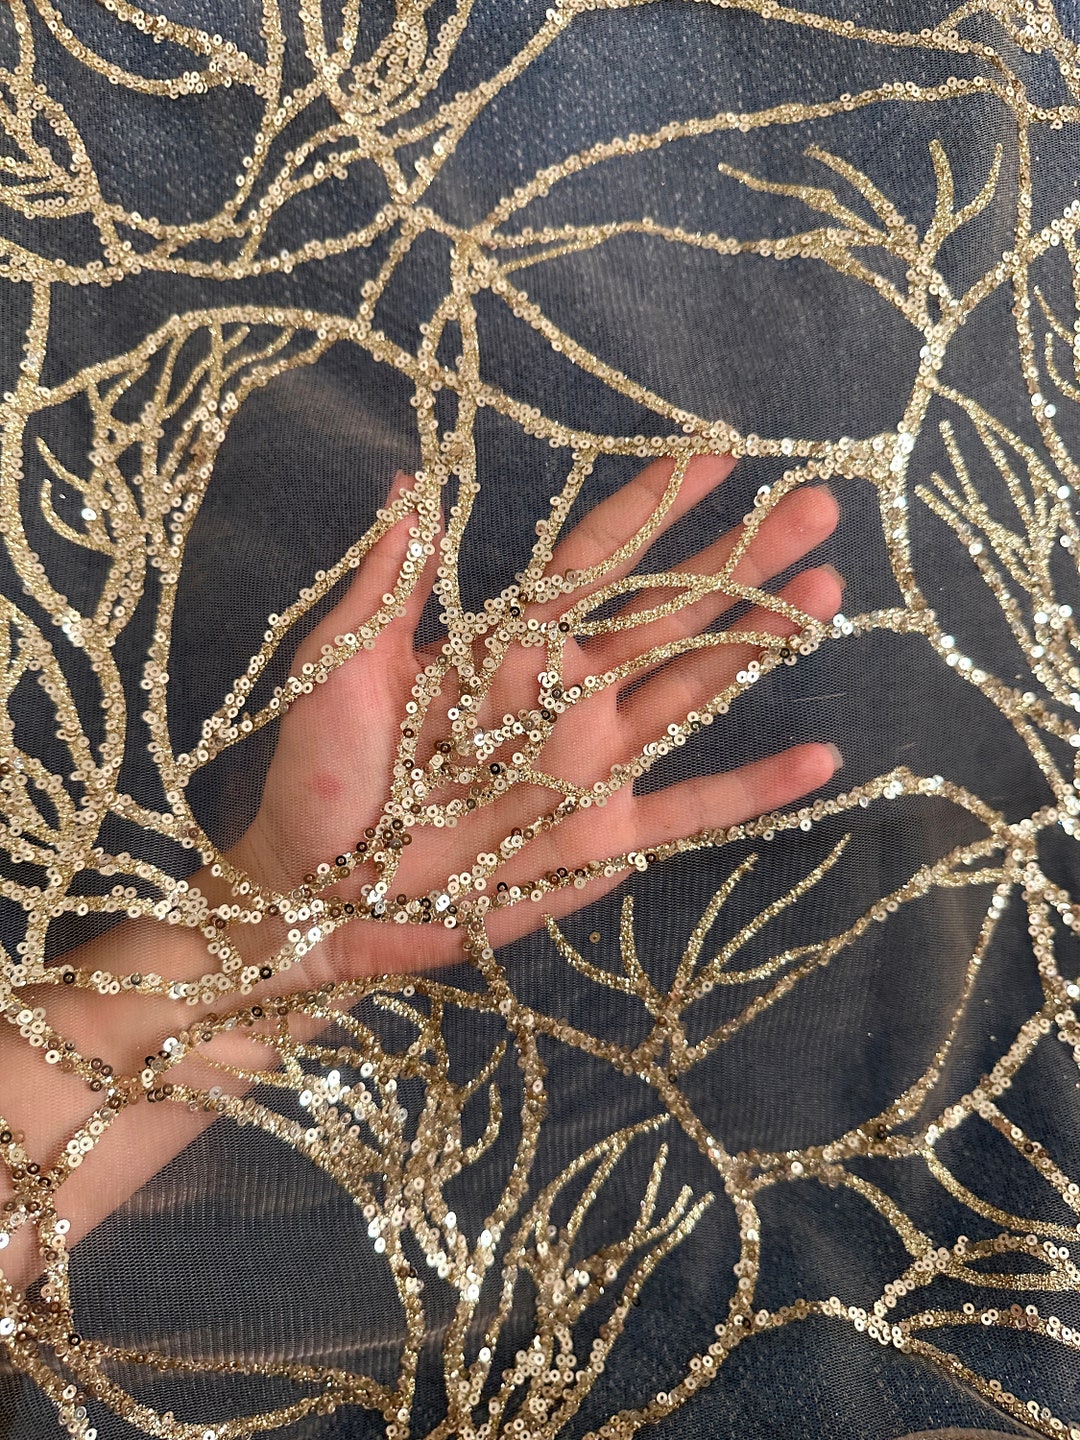 Gold Glitter Branch Design Lace Fabric, Geometric Gold Stretch Lace on ...